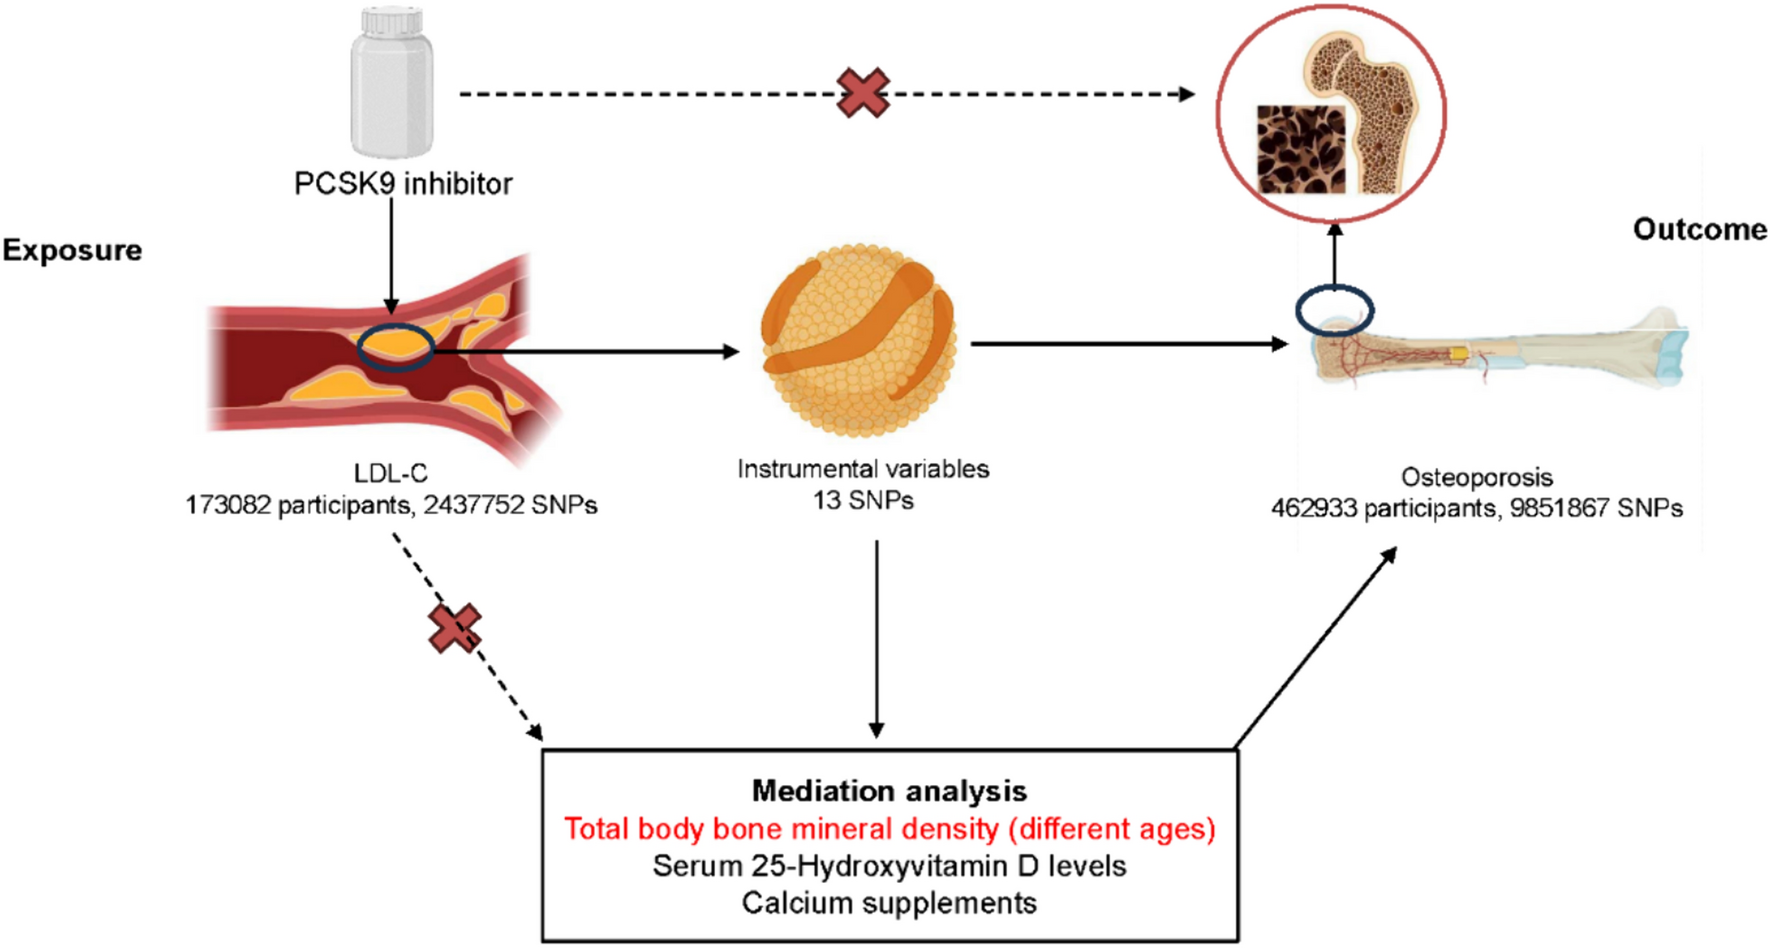 The Causal Relationship between PCSK9 Inhibitors and Osteoporosis Based on Drug-Targeted Mendelian Combined Mediation Analysis